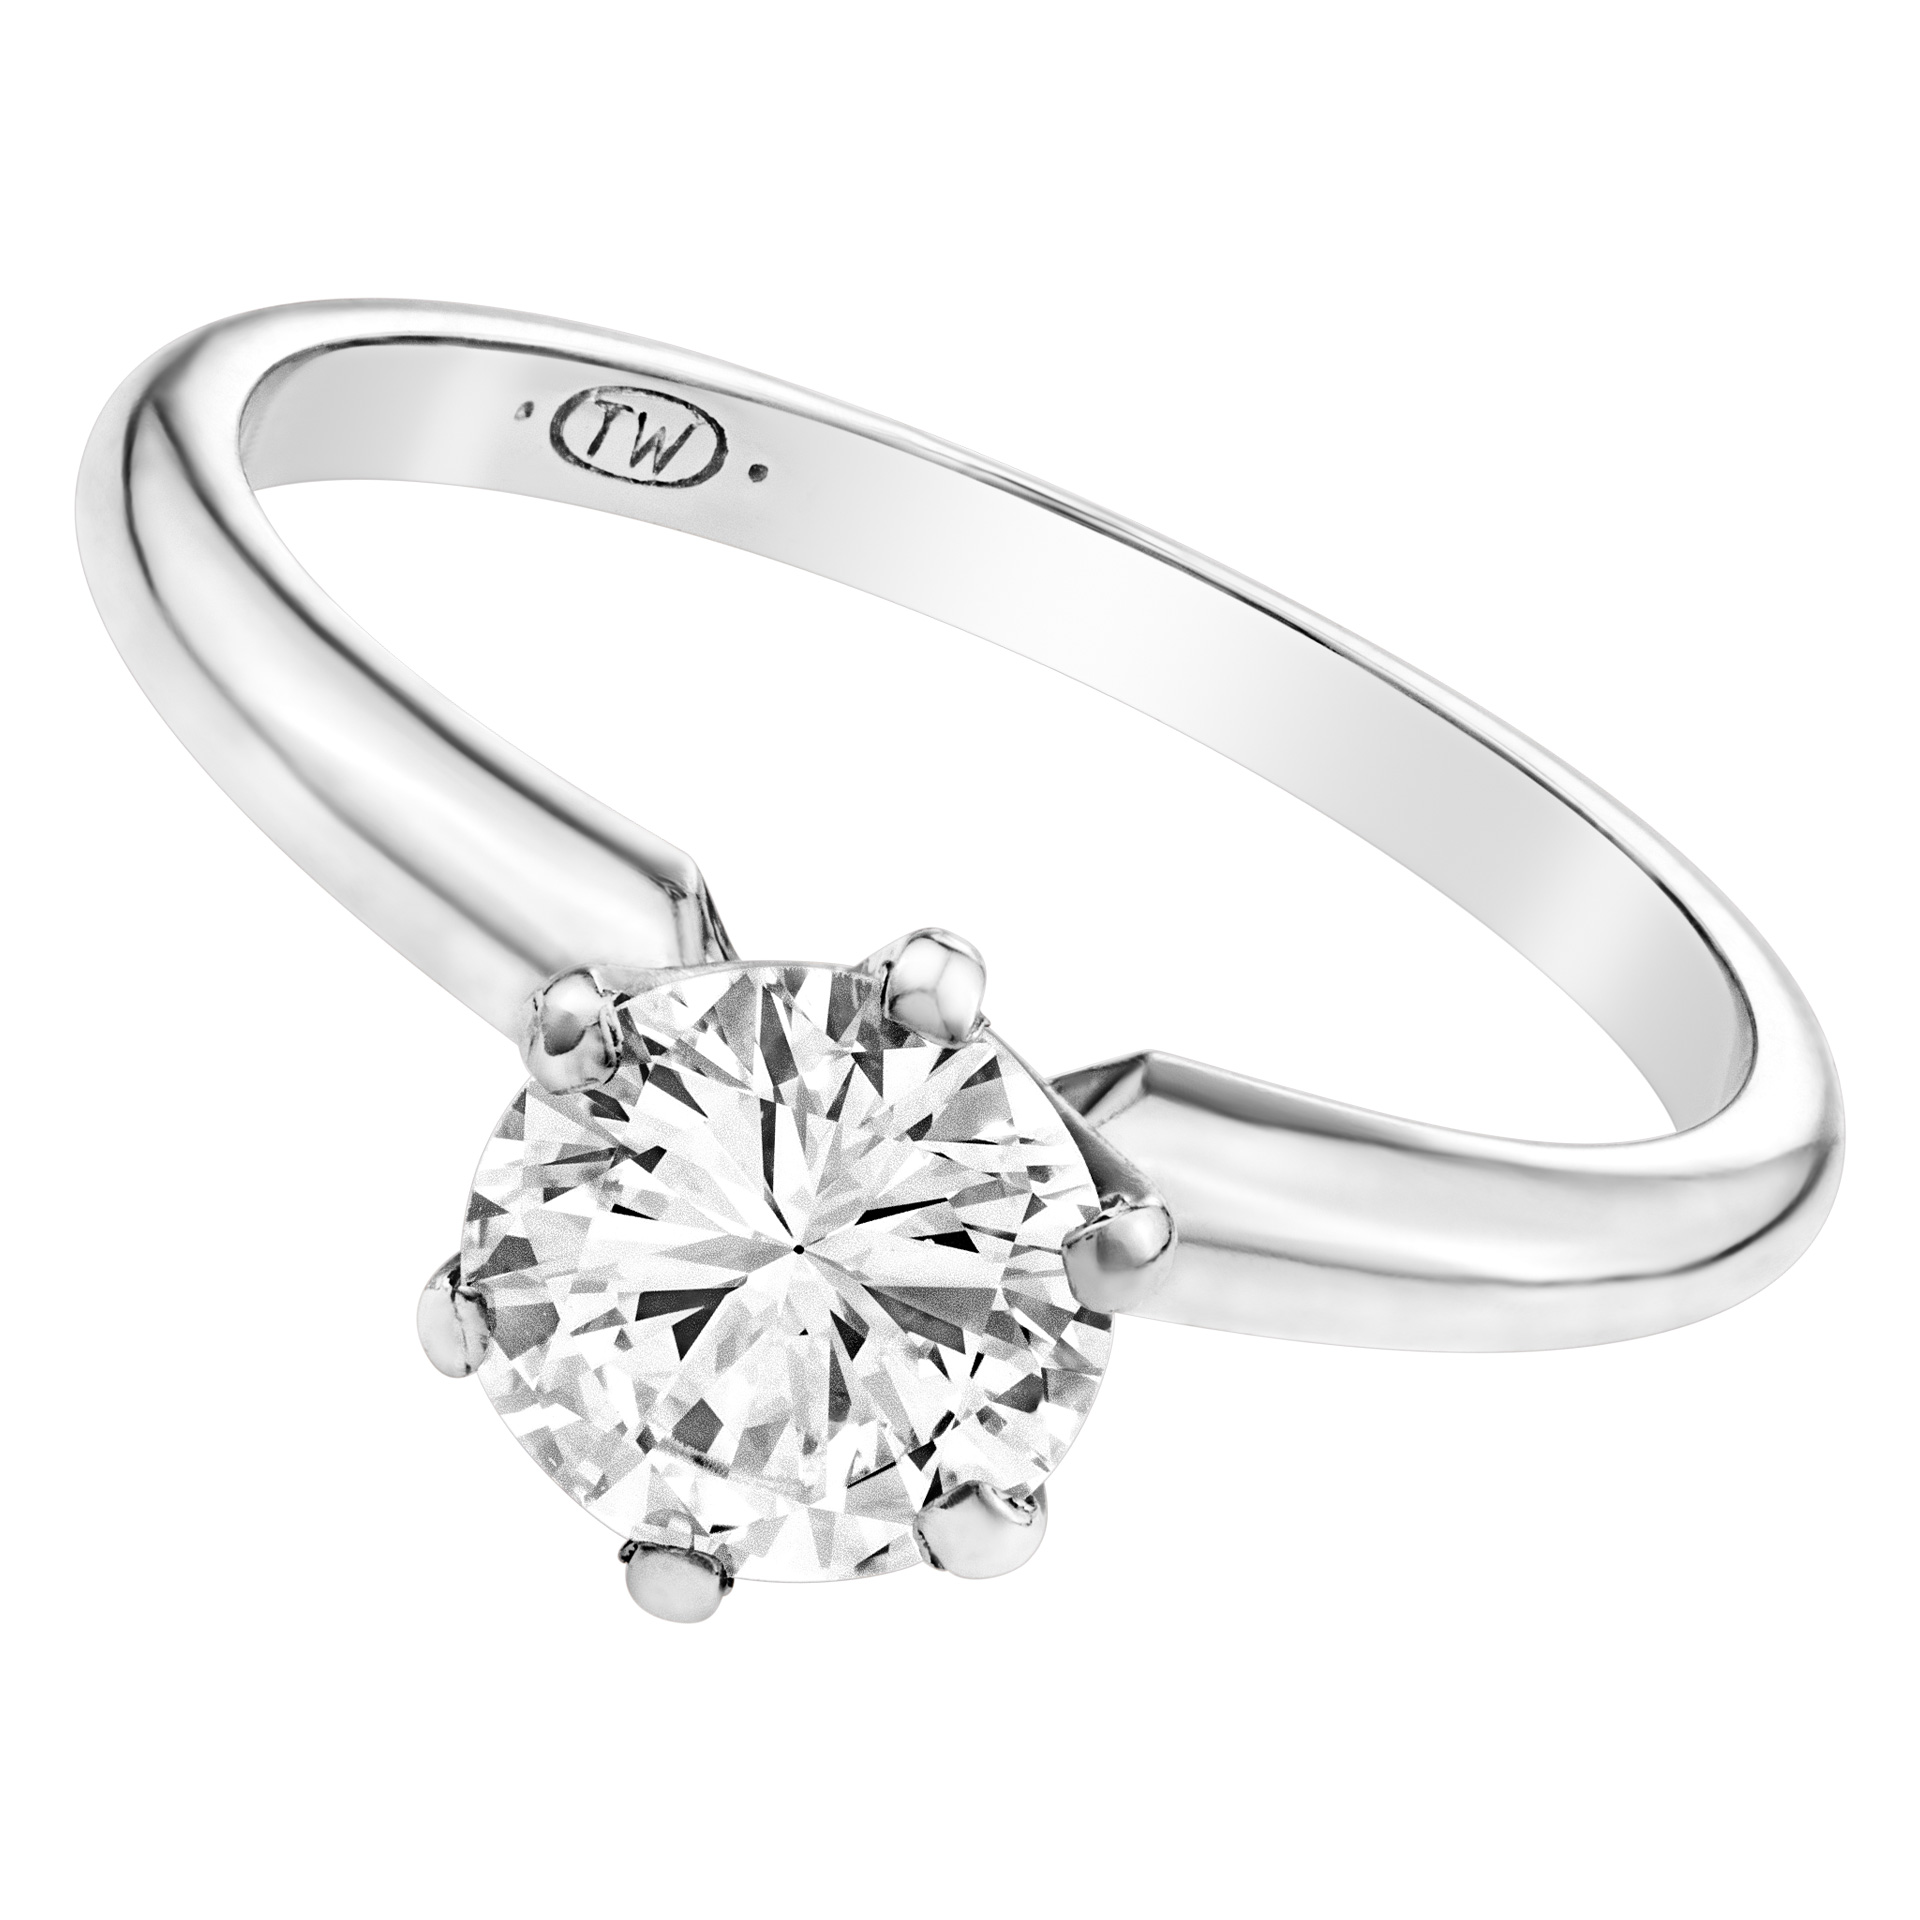 Gia Certified Round Diamond .93cts F Color Vvs-2 Clarity